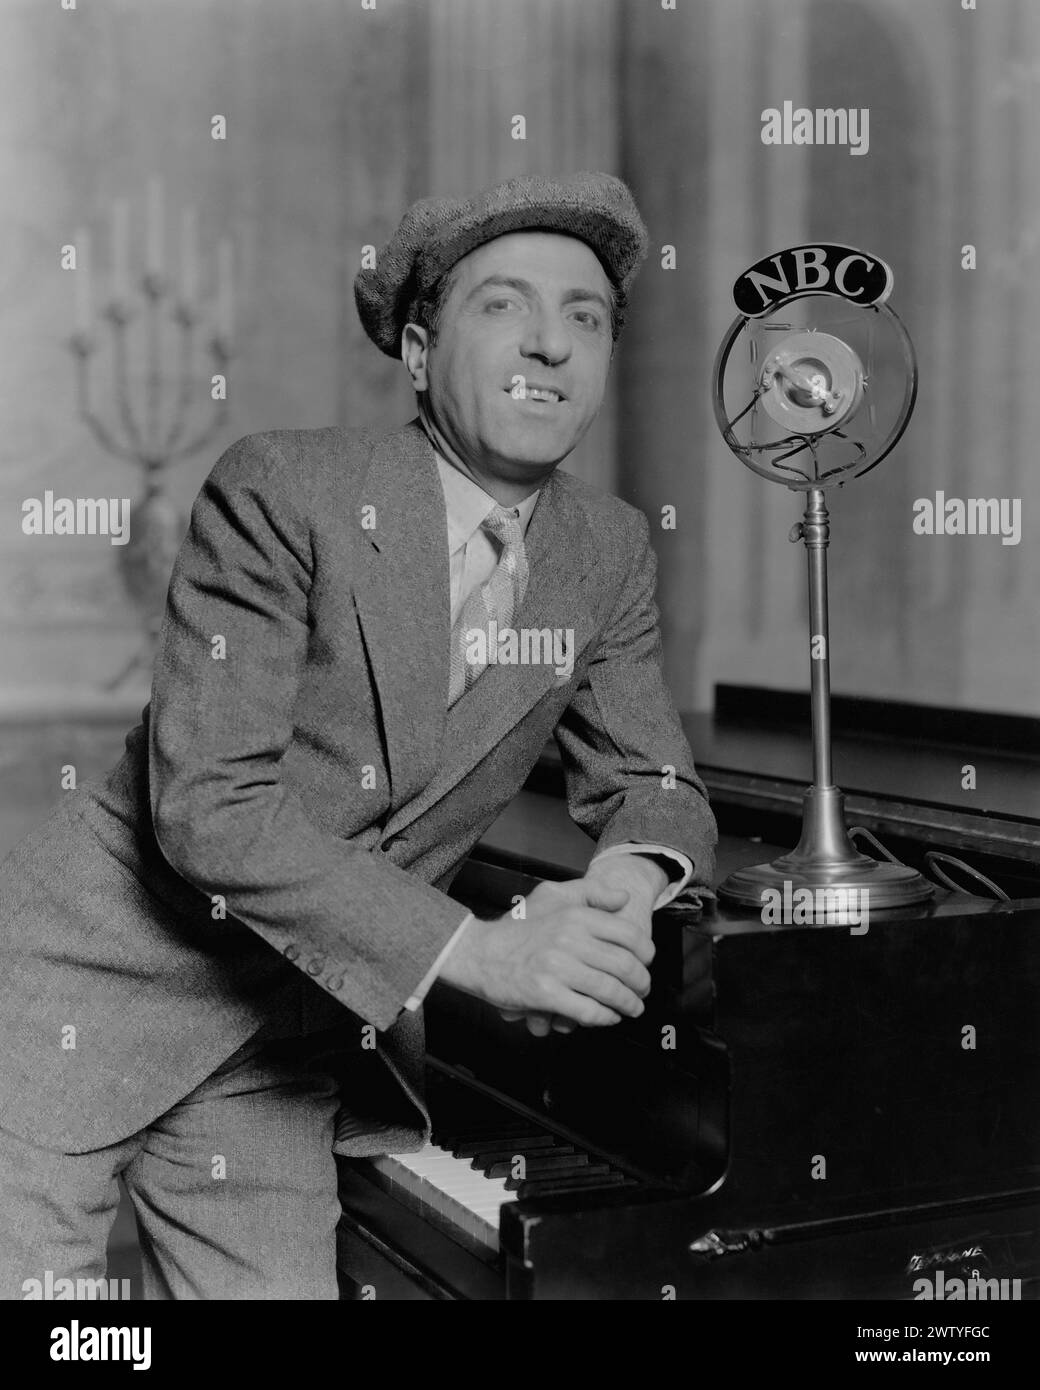 Musician Ted Lewis in a business suit and a hat leaning on a piano with an NBC microphone next to him Stock Photo